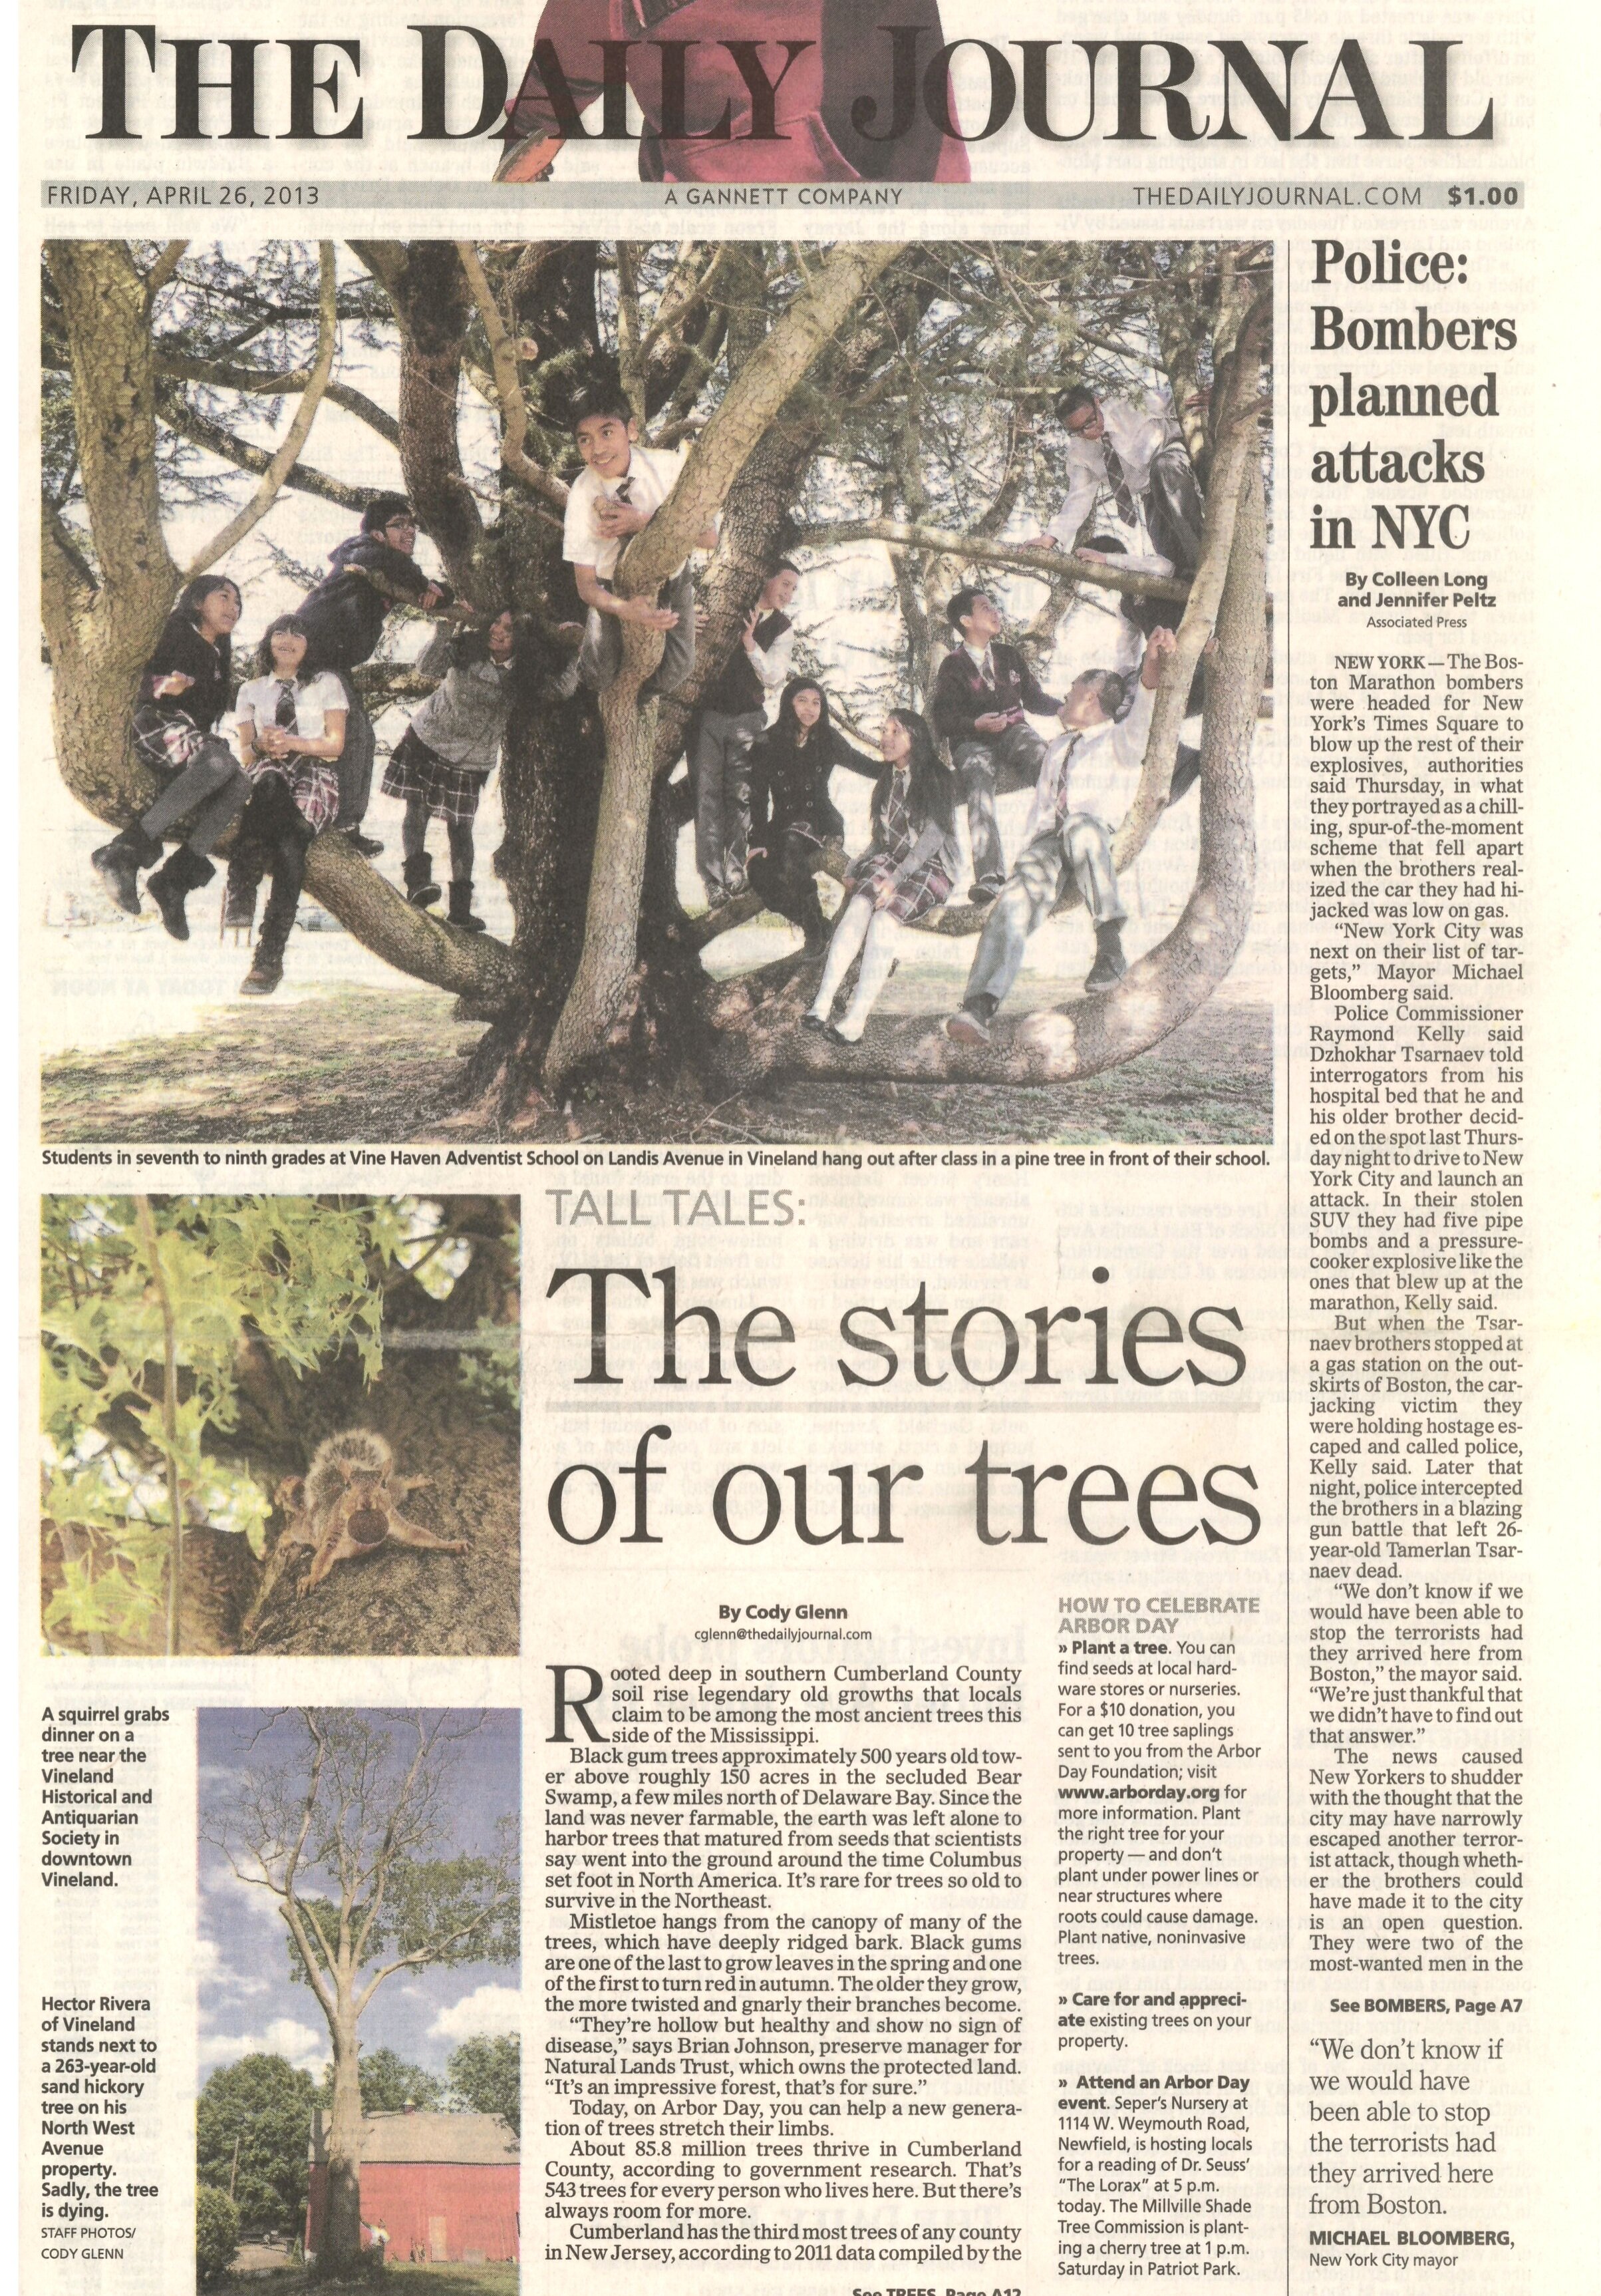  The trees of Southern New Jersey on Arbor Day April 26 2013 /  The Daily Journal  